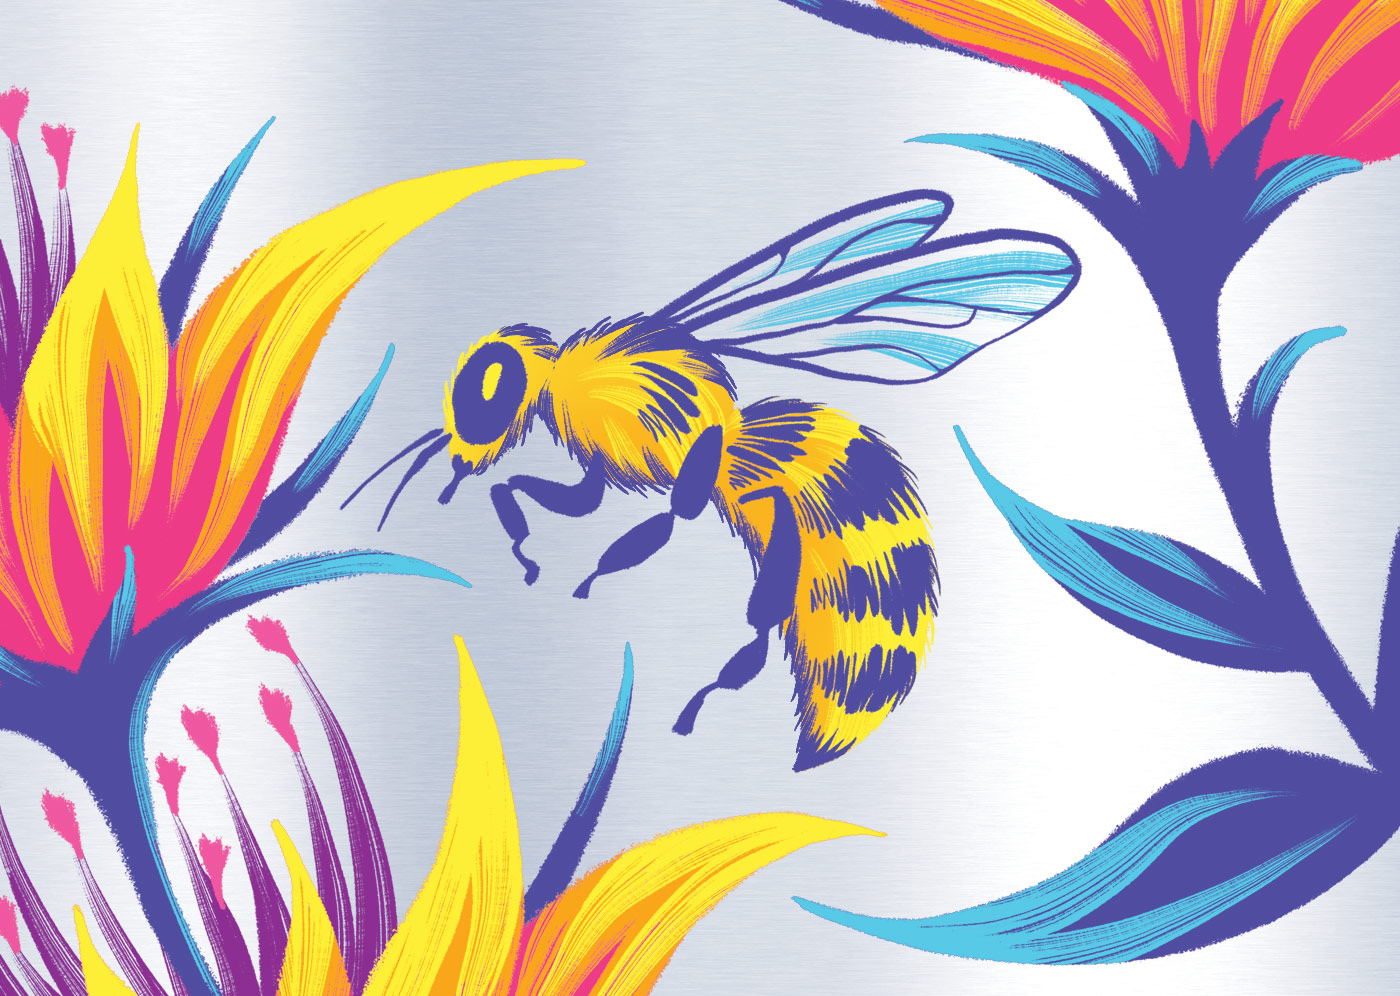 Honey bee illustration beer can artwork by Andrea Muller